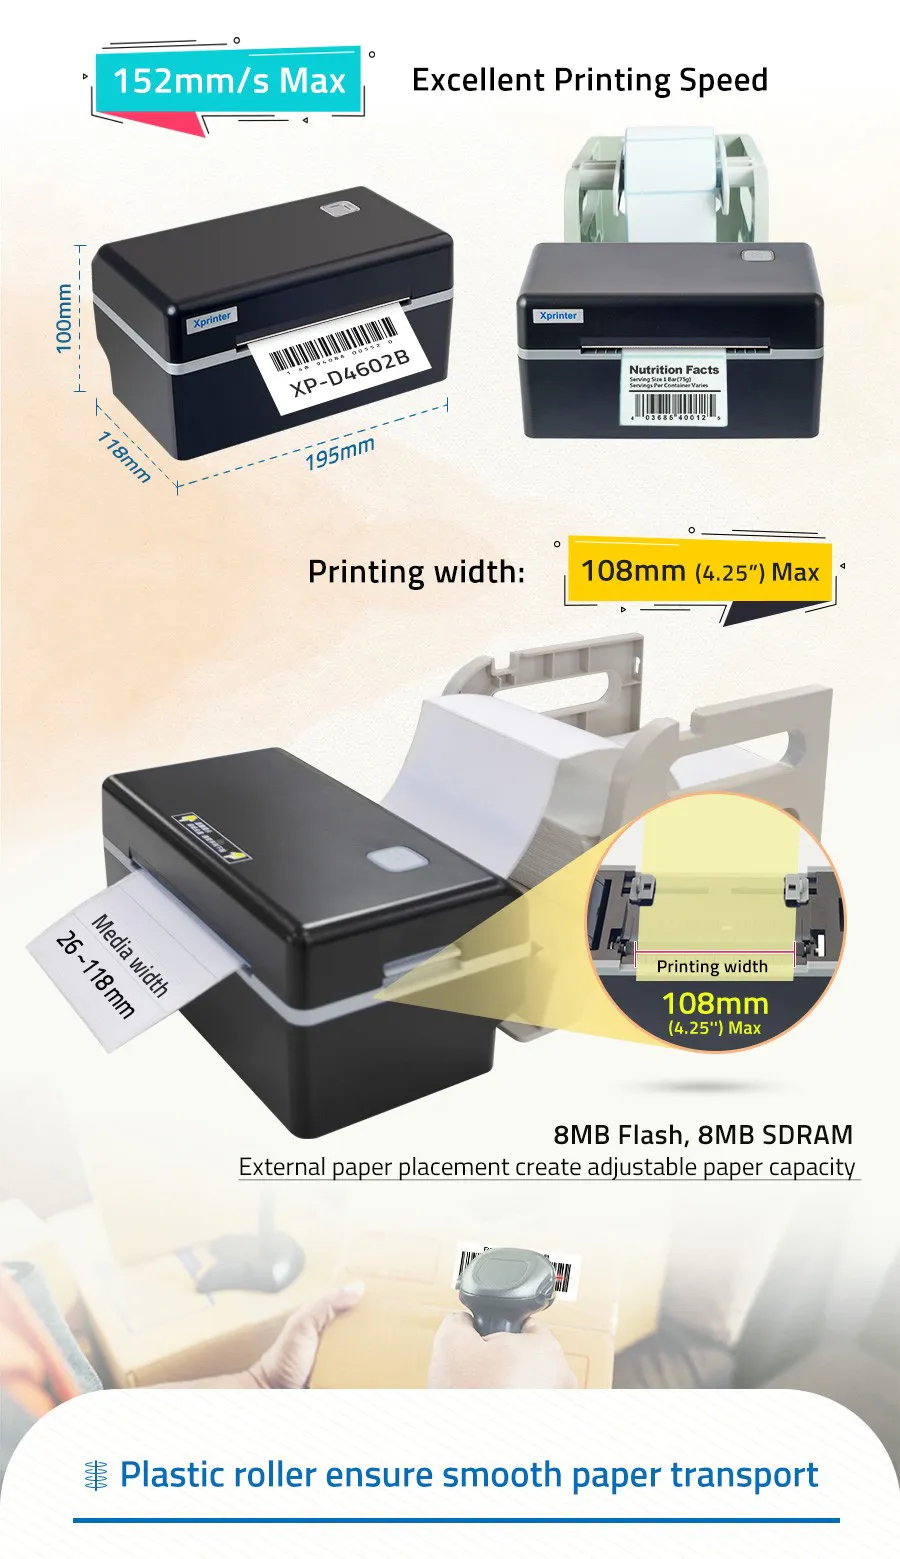 Xprinter barcode label maker machine customized for shop